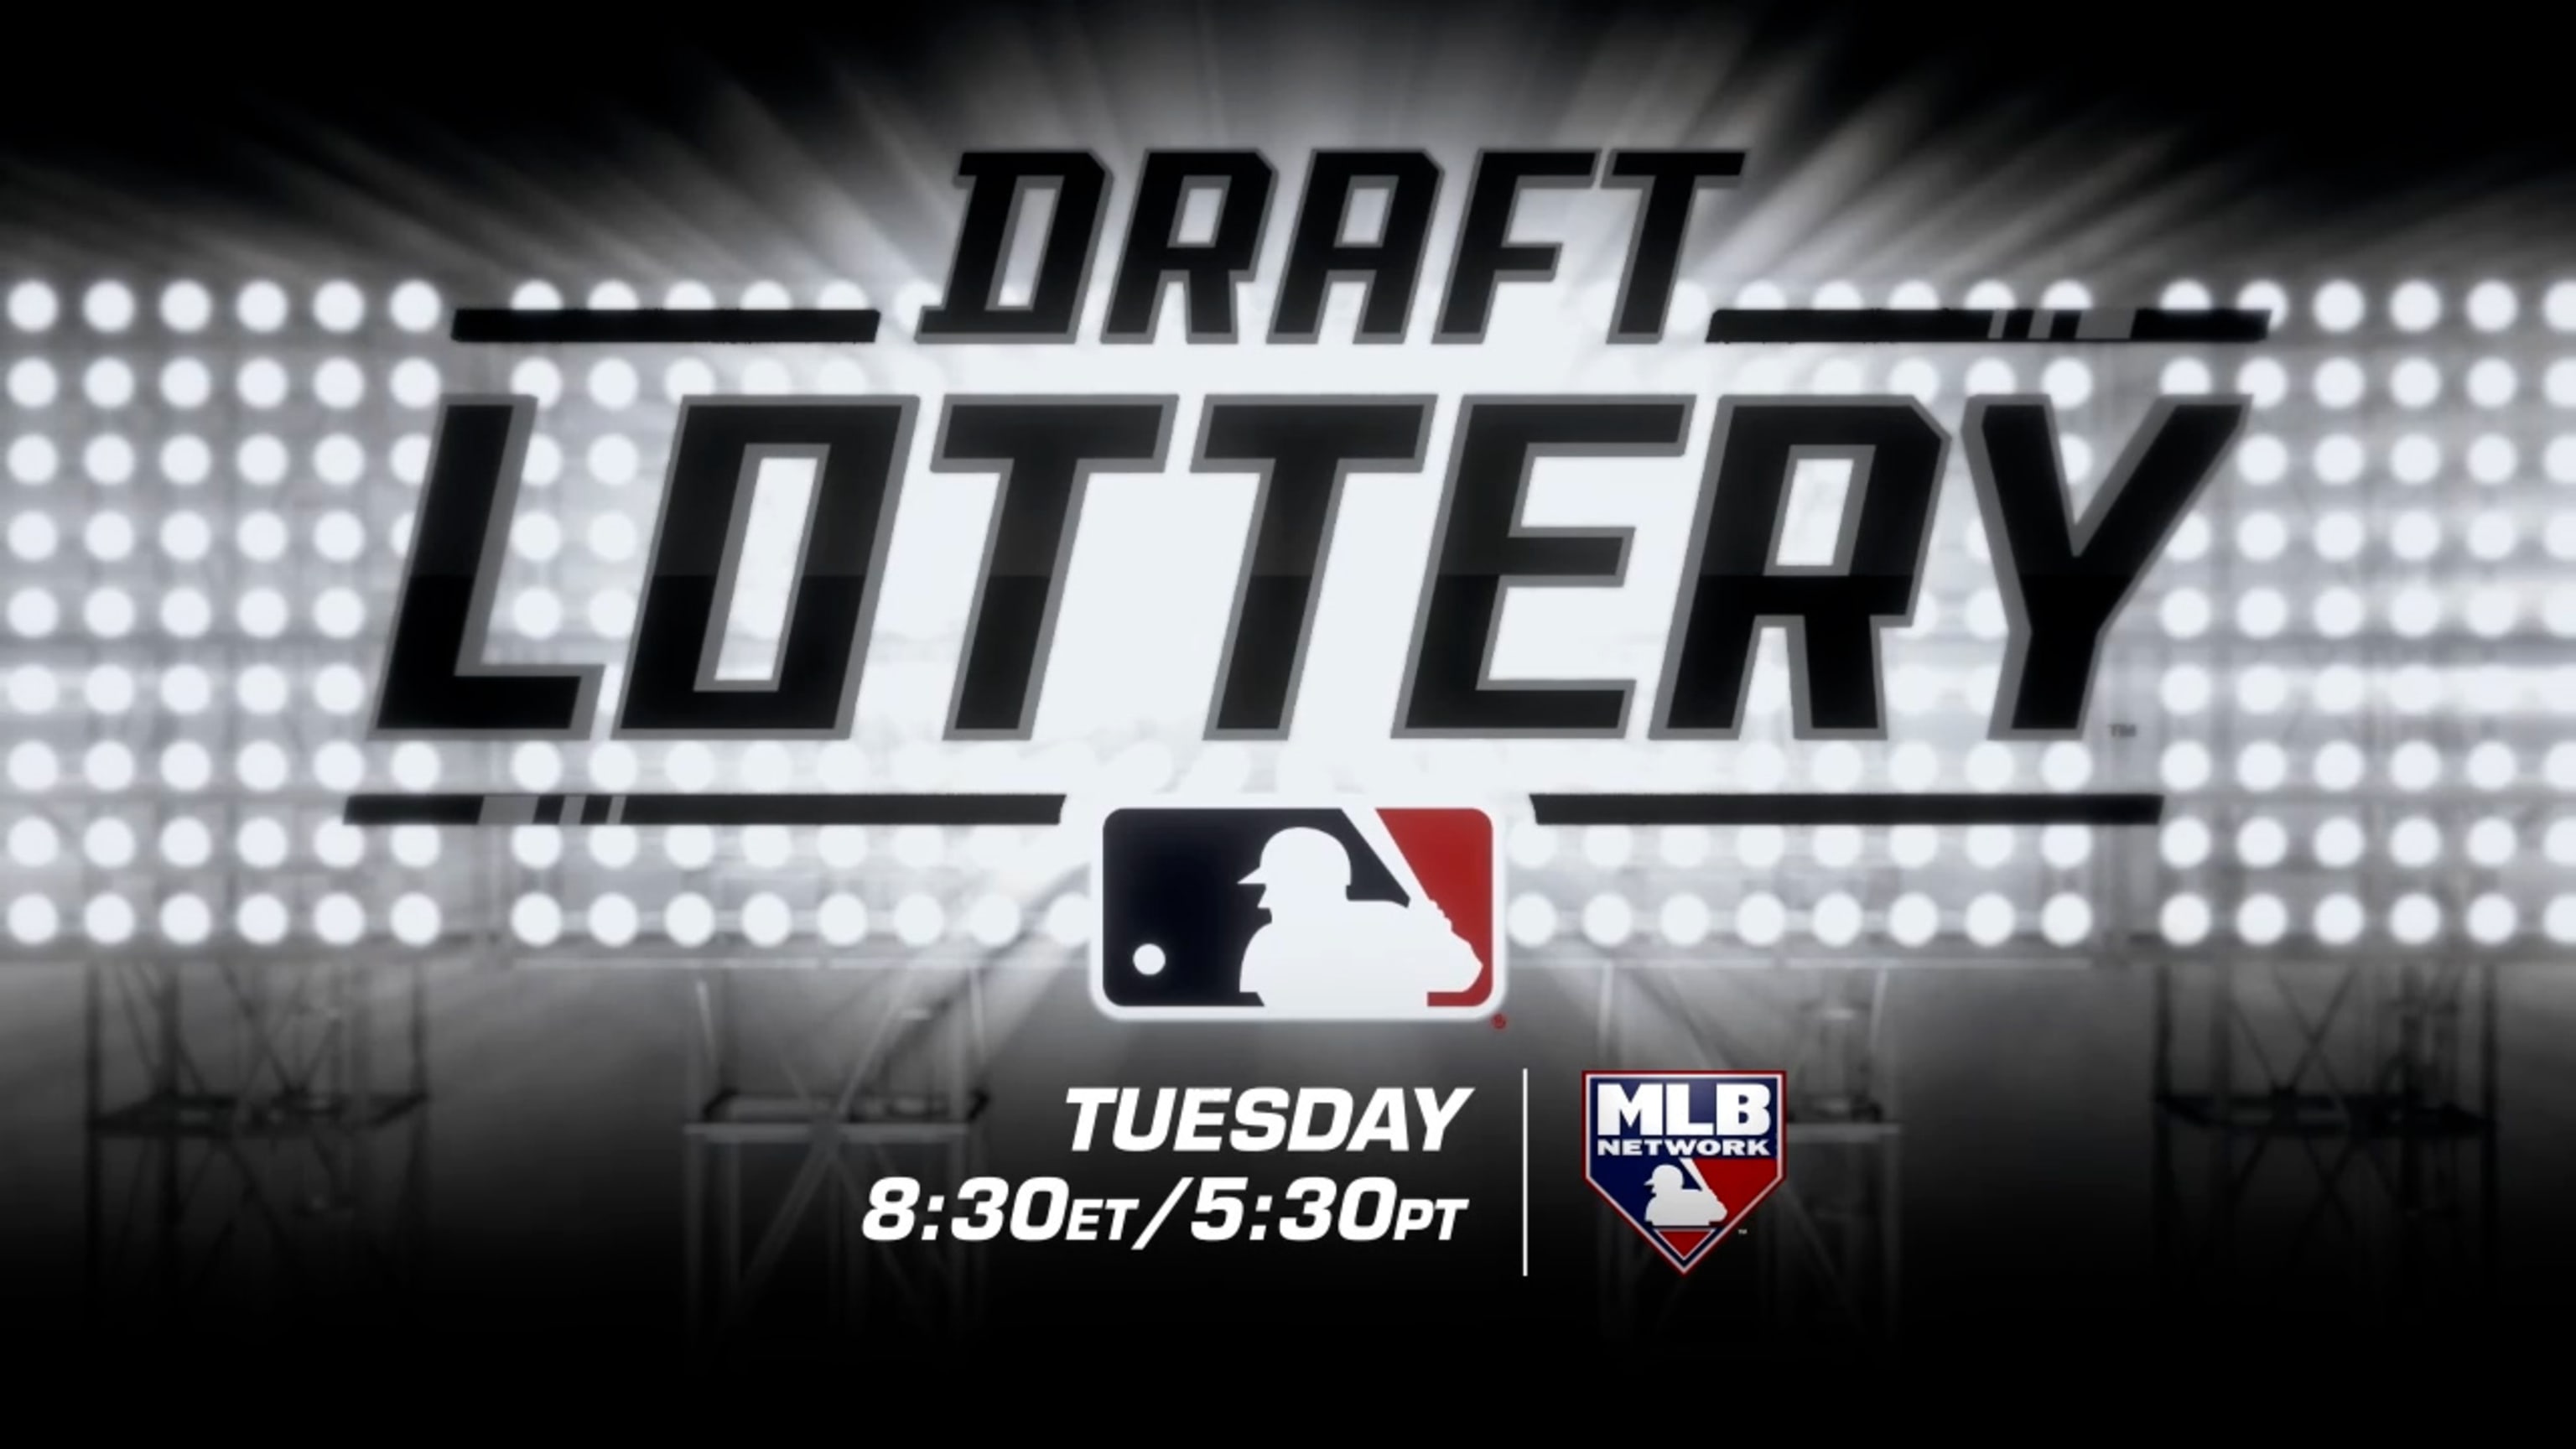 MLB Draft lottery unlike any other